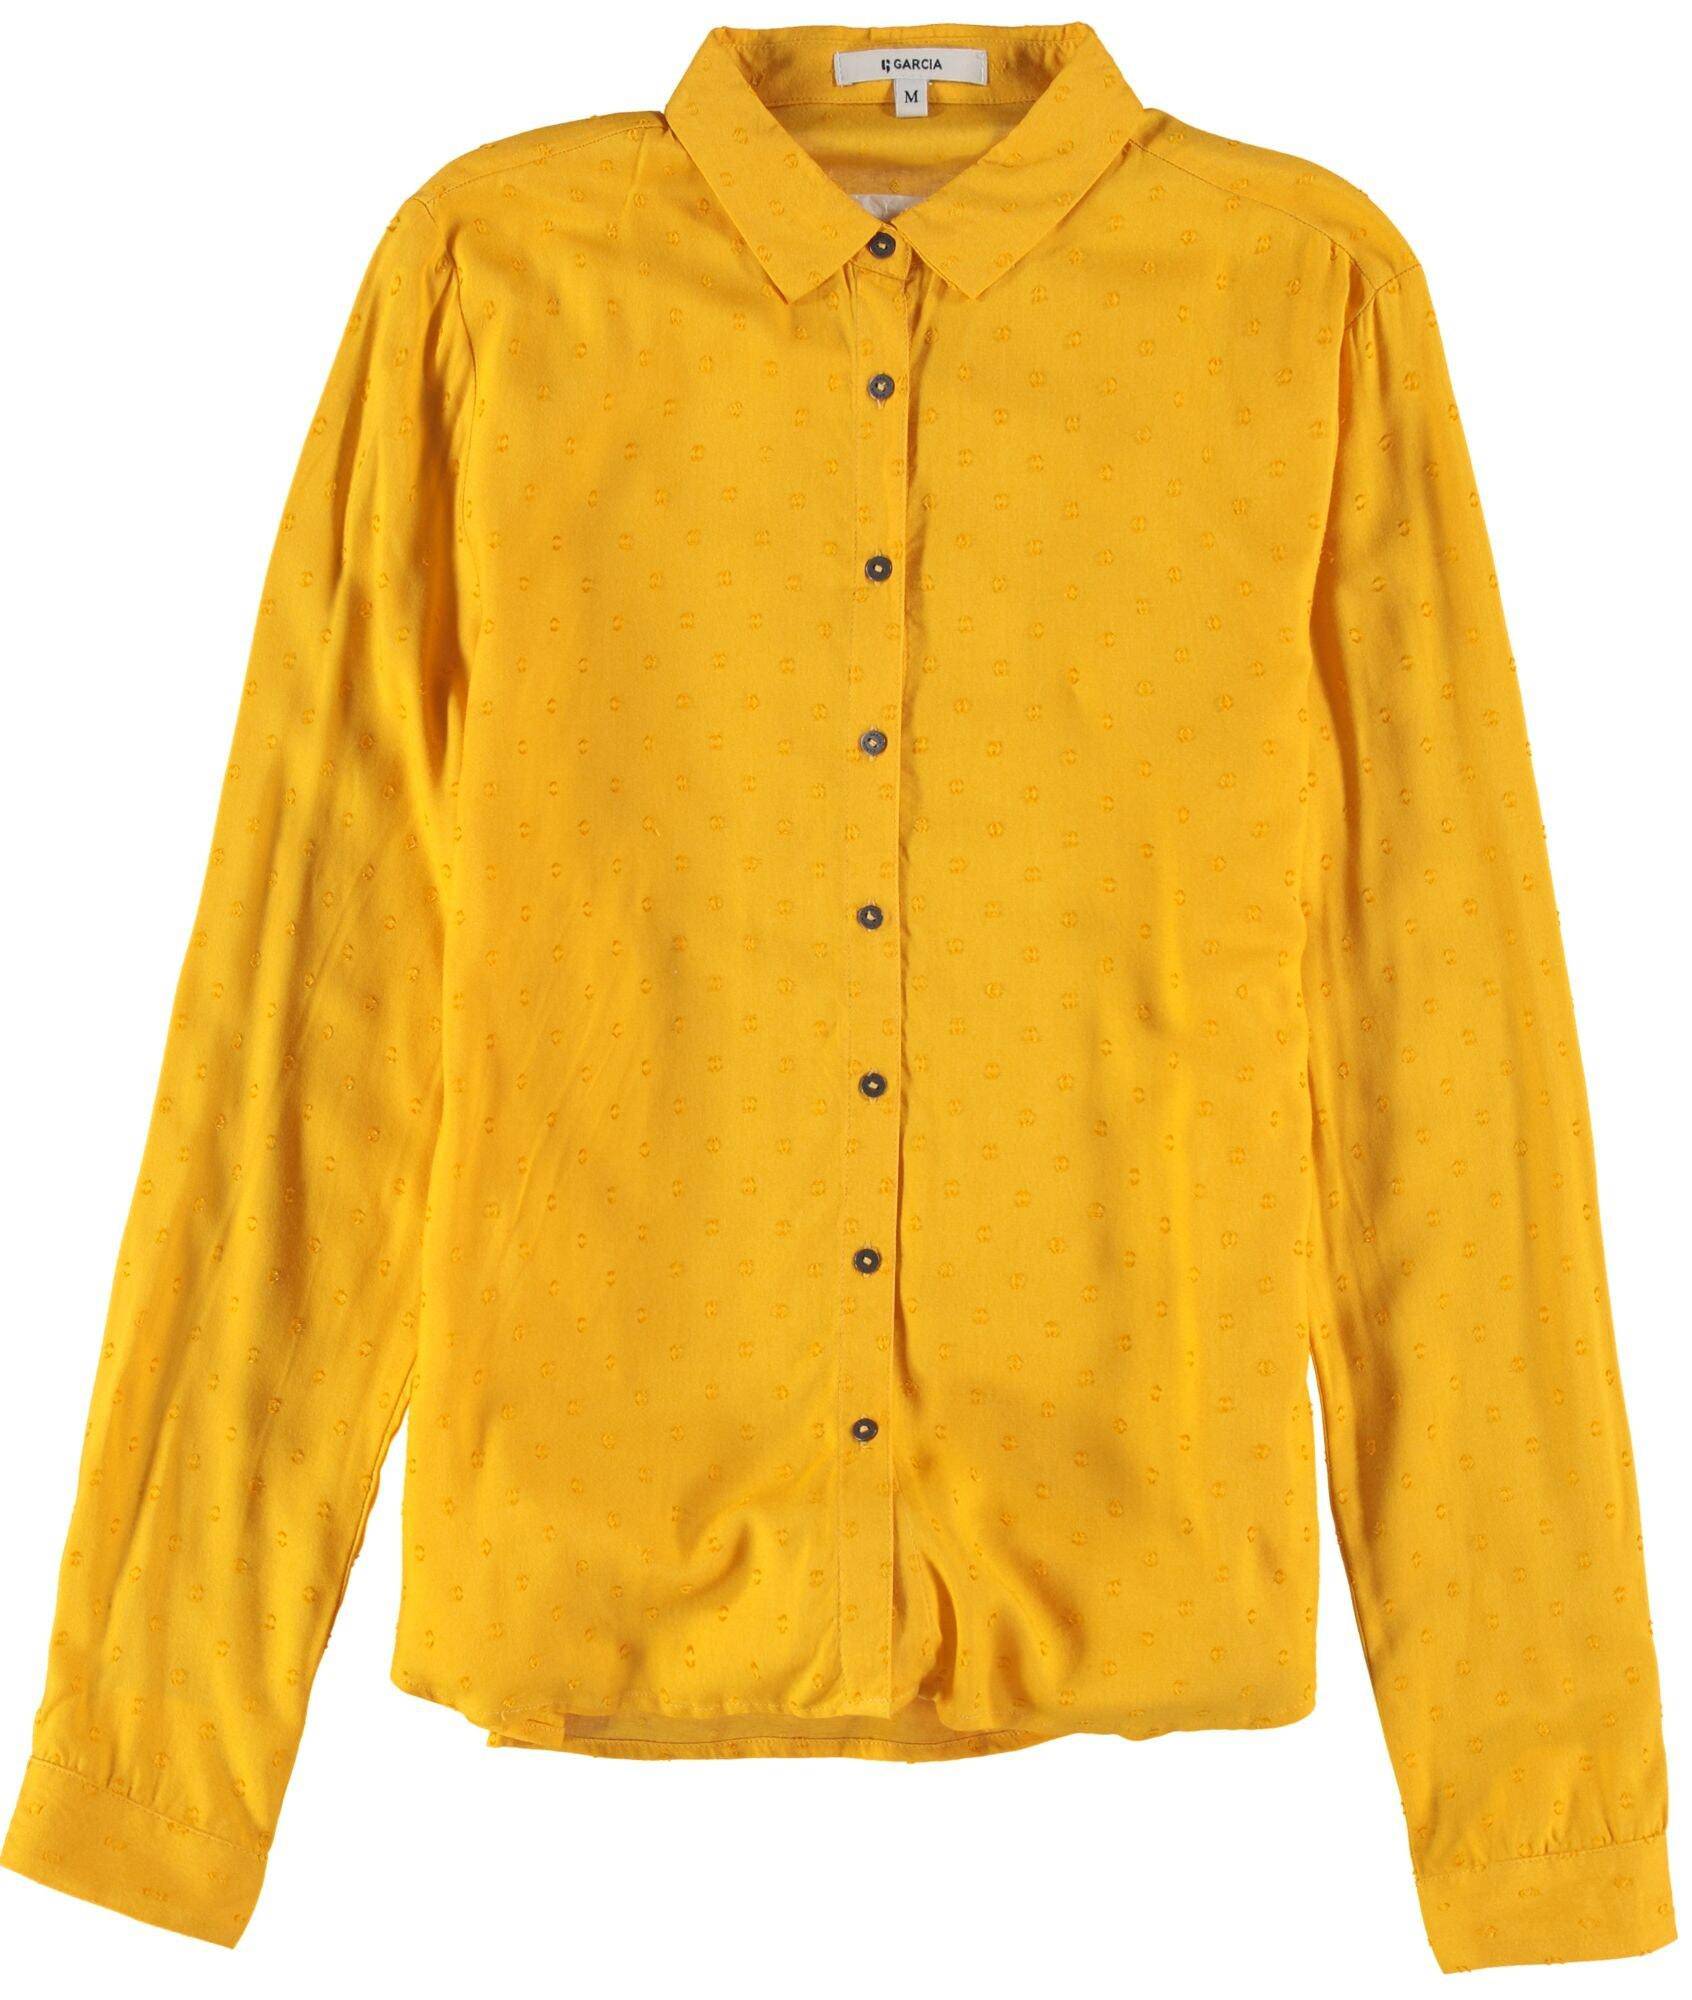 Bright Yellow Garcia Shirt - Your Style Your Story